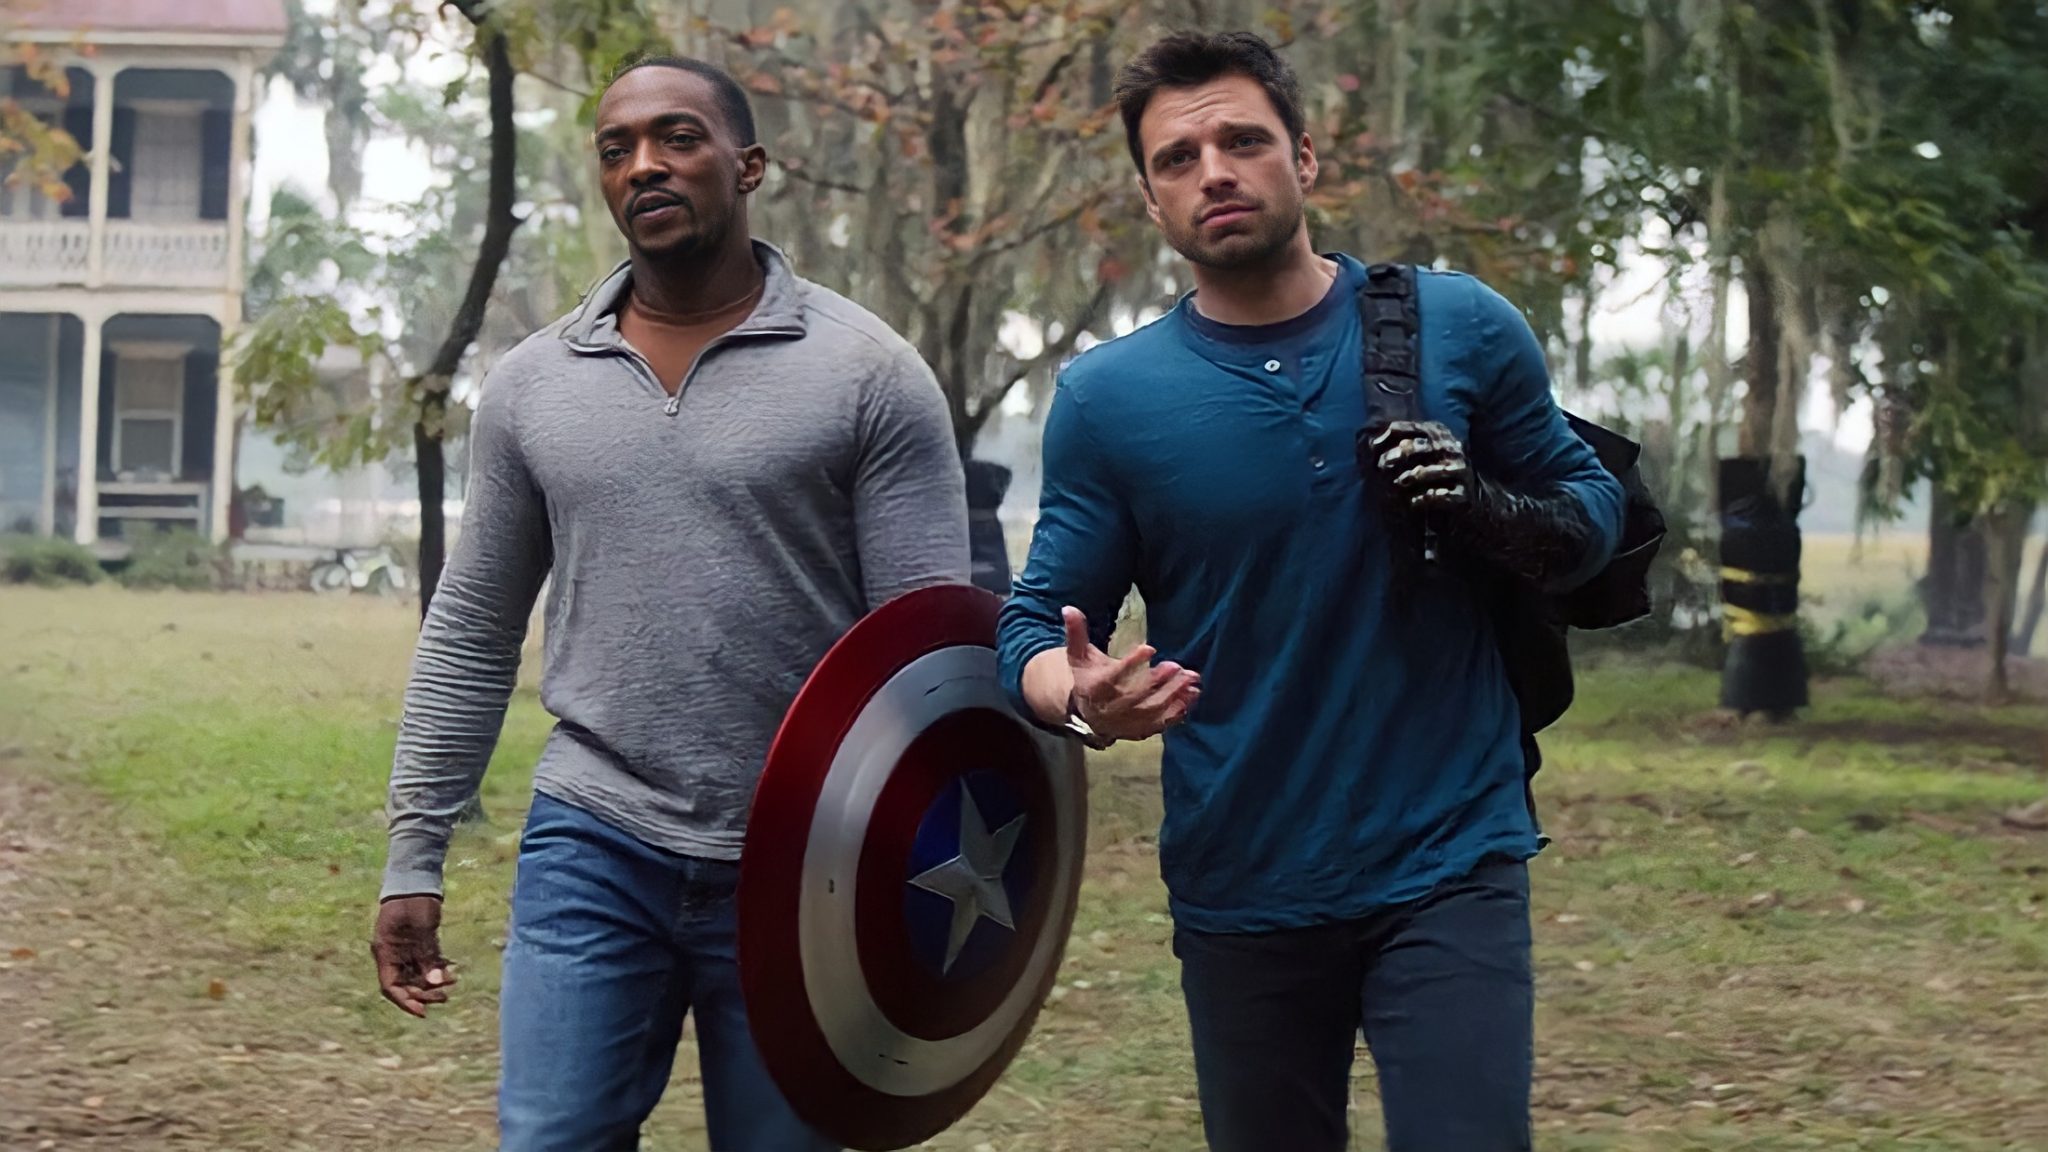 Credit: Disney (The Falcon and The Winter Soldier)